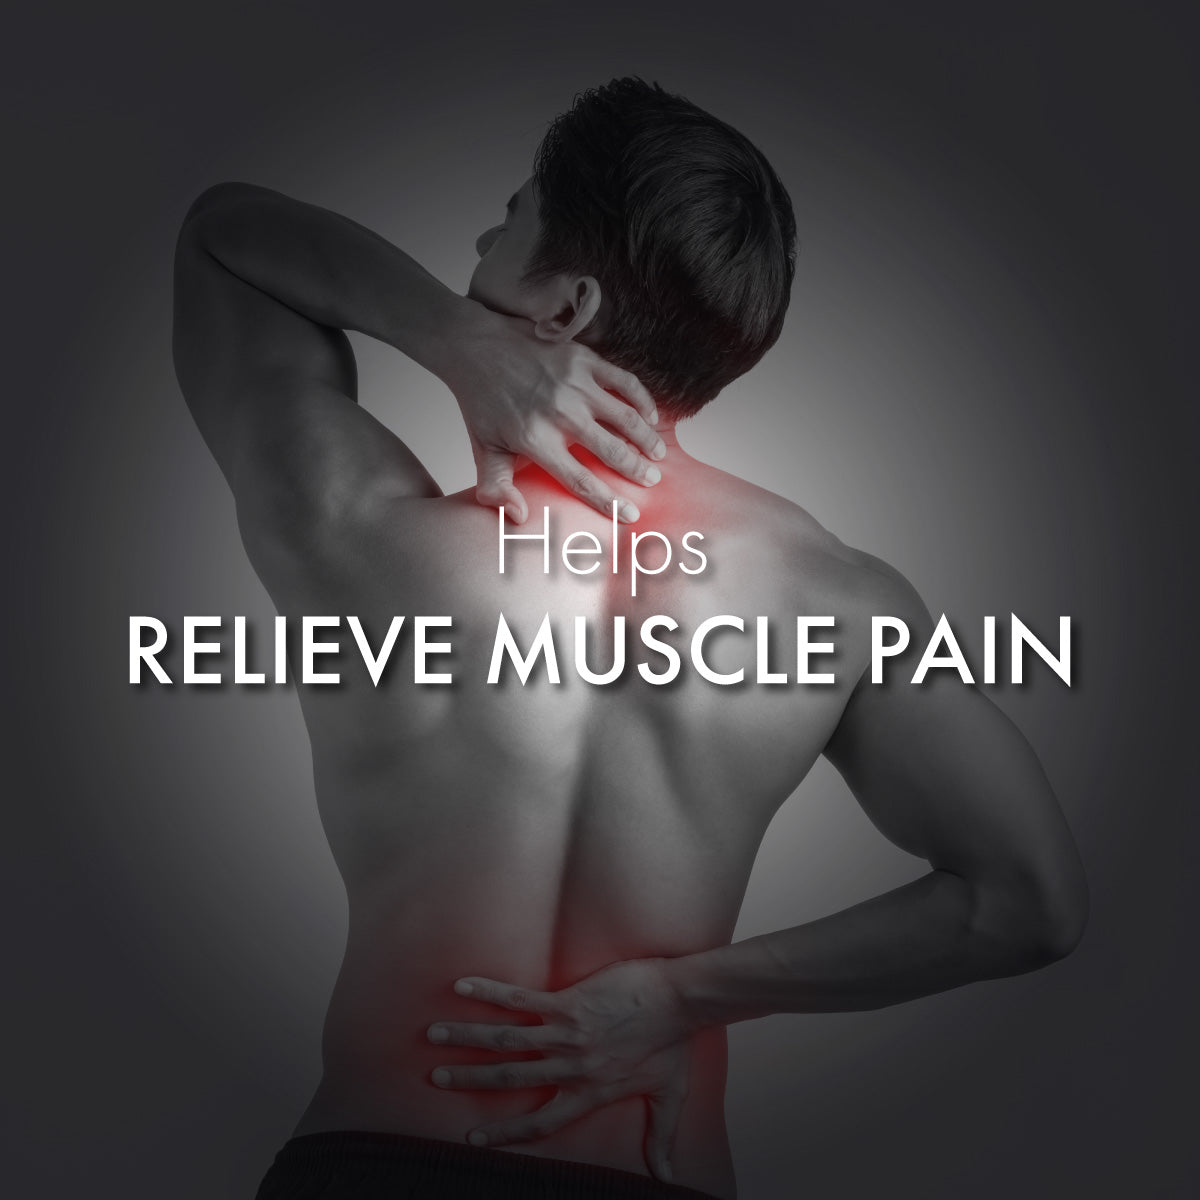 Pain Relief Caps: To Relieve Joint & Muscle Pain